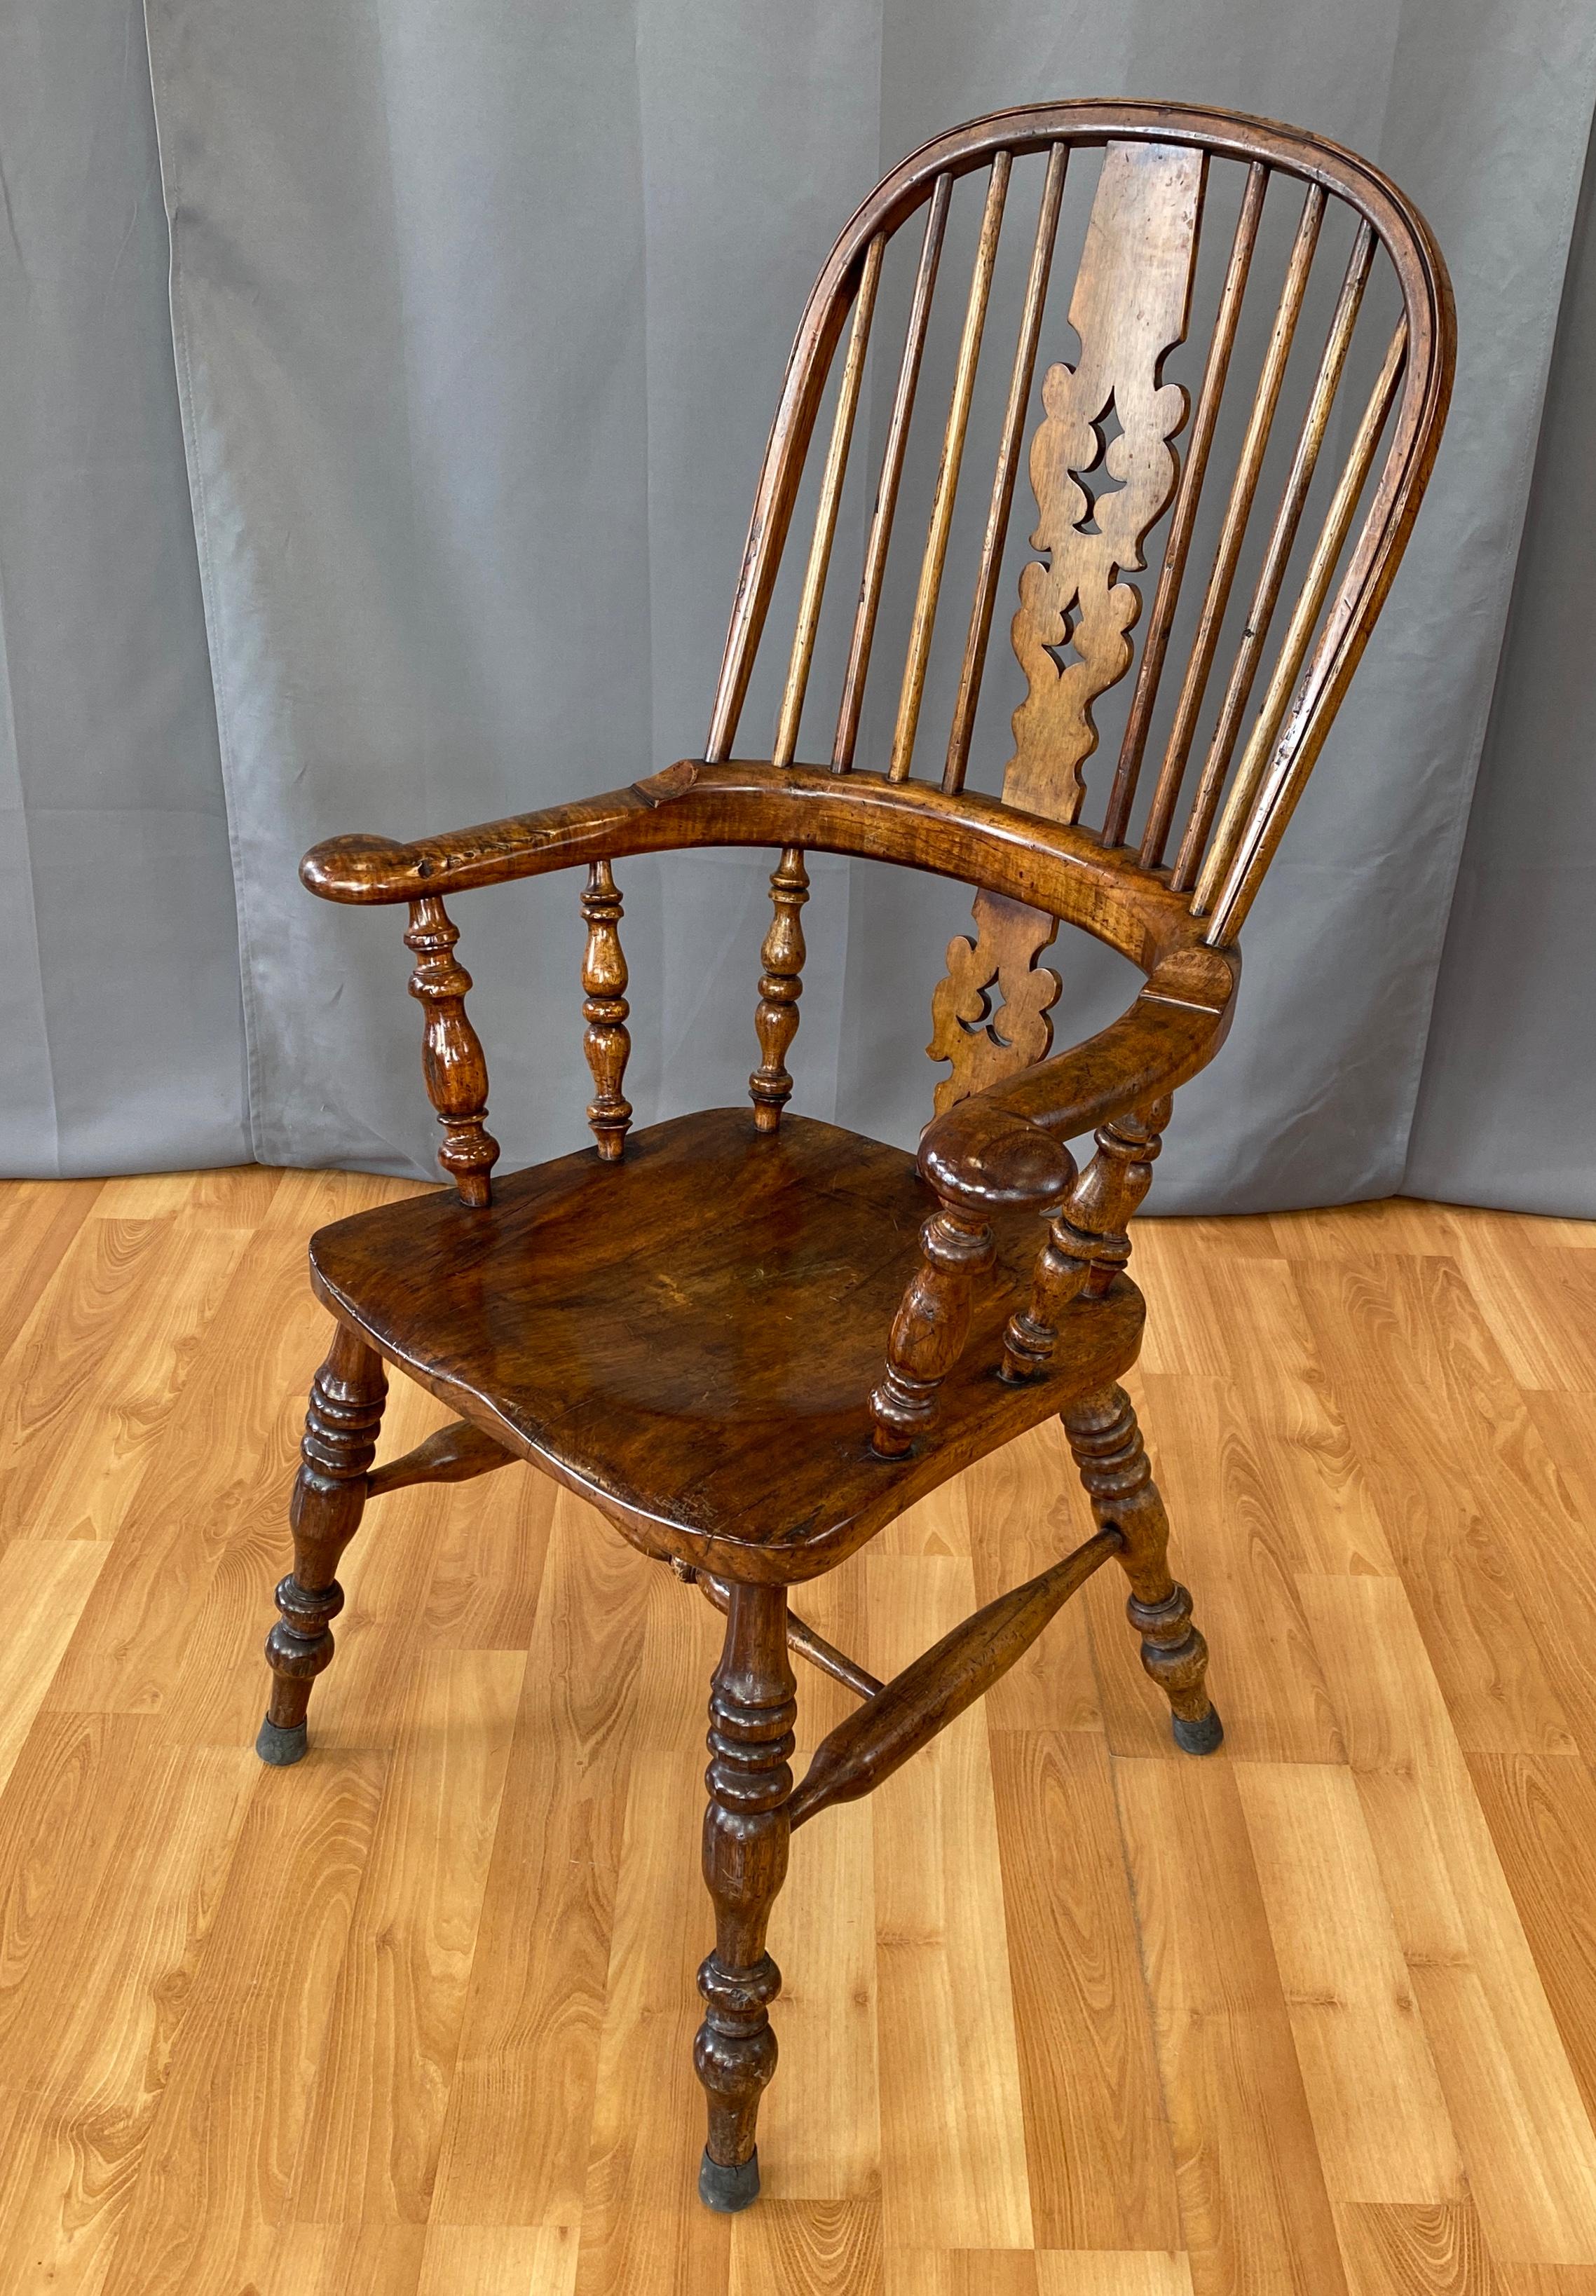 Offered here is custom crafted Windsor hoop back arm chair. 
With large proportions, starting with turned legs with a single stretcher
joining the pairs, generous seat, broad arms, high back with a carved center slat in the middle of a nice set of